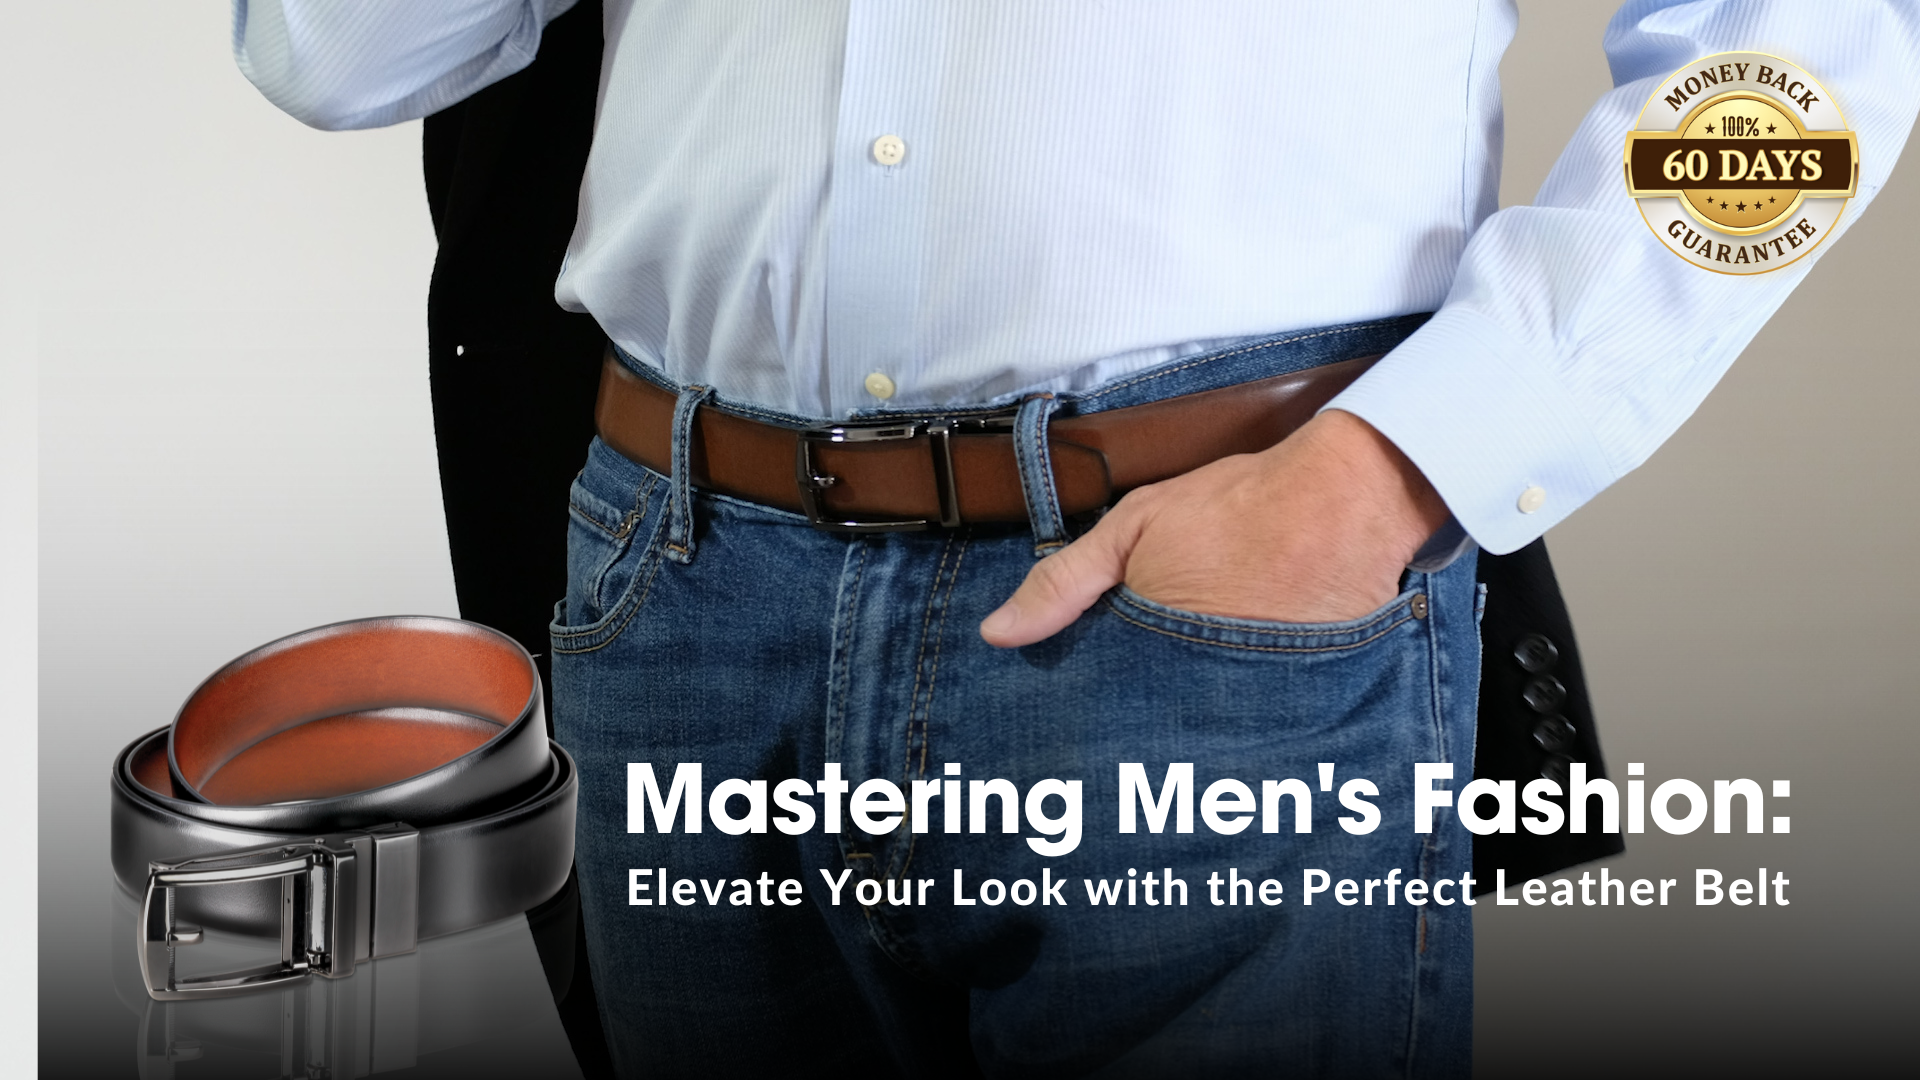 Mastering Men's Fashion: Elevate Your Look with the Perfect Leather Belt